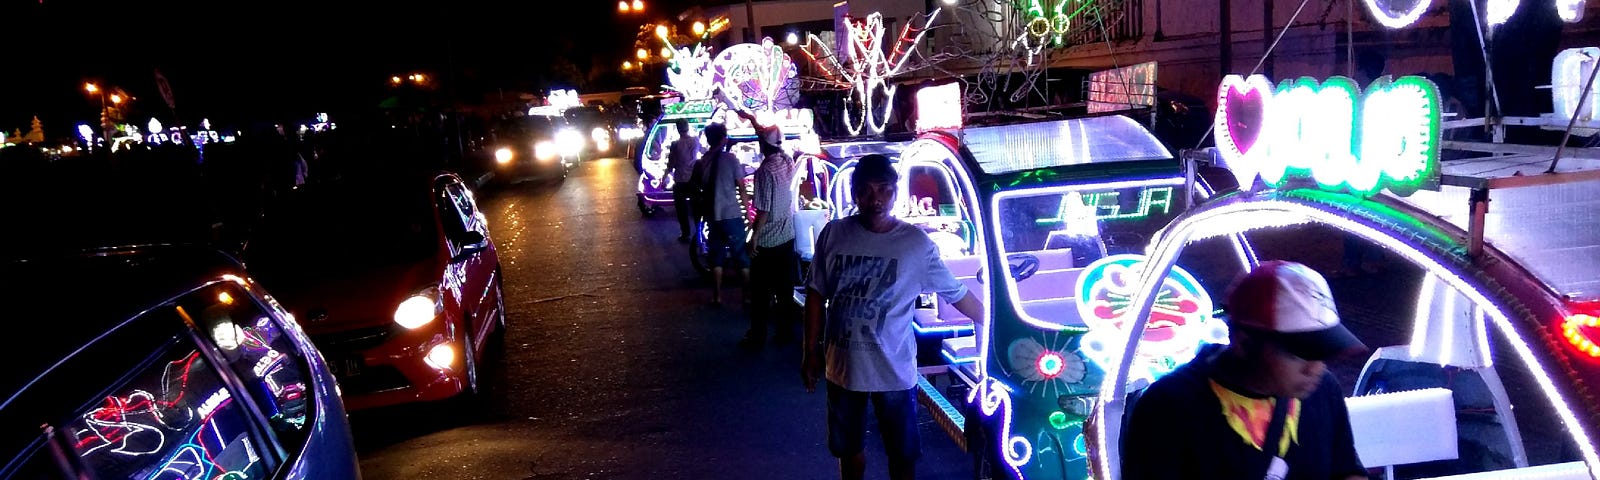 Neon pedal cars built and rented by young entrepreneurs in Yogyakarta Indonesia